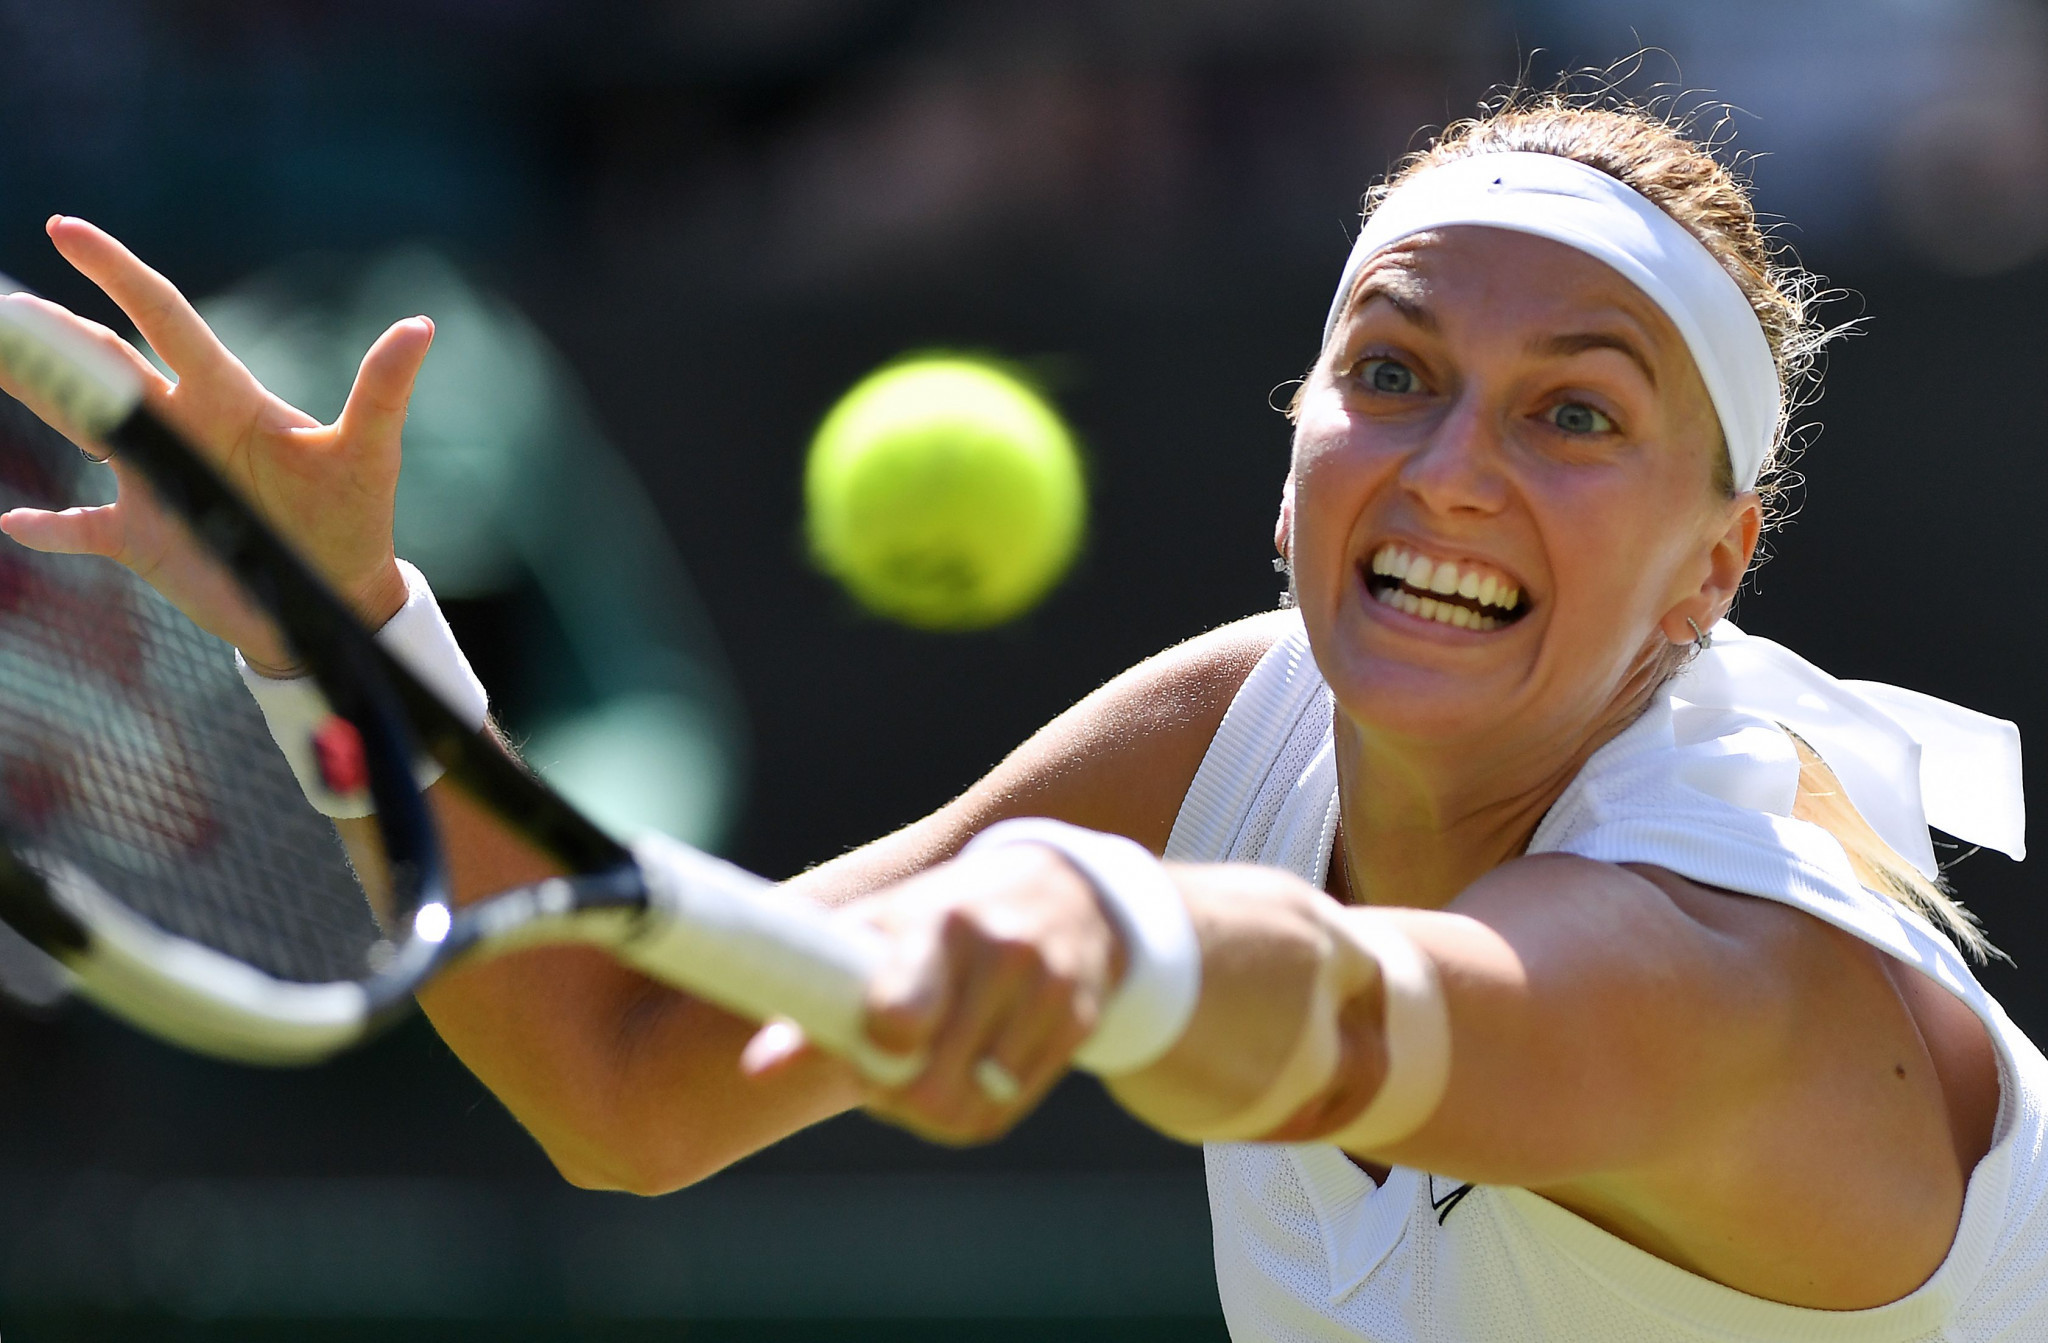 Two-time Wimbledon champion Petra Kvitova recovered from a scare in the first set to beat Kristina Mladenovic ©Getty Images